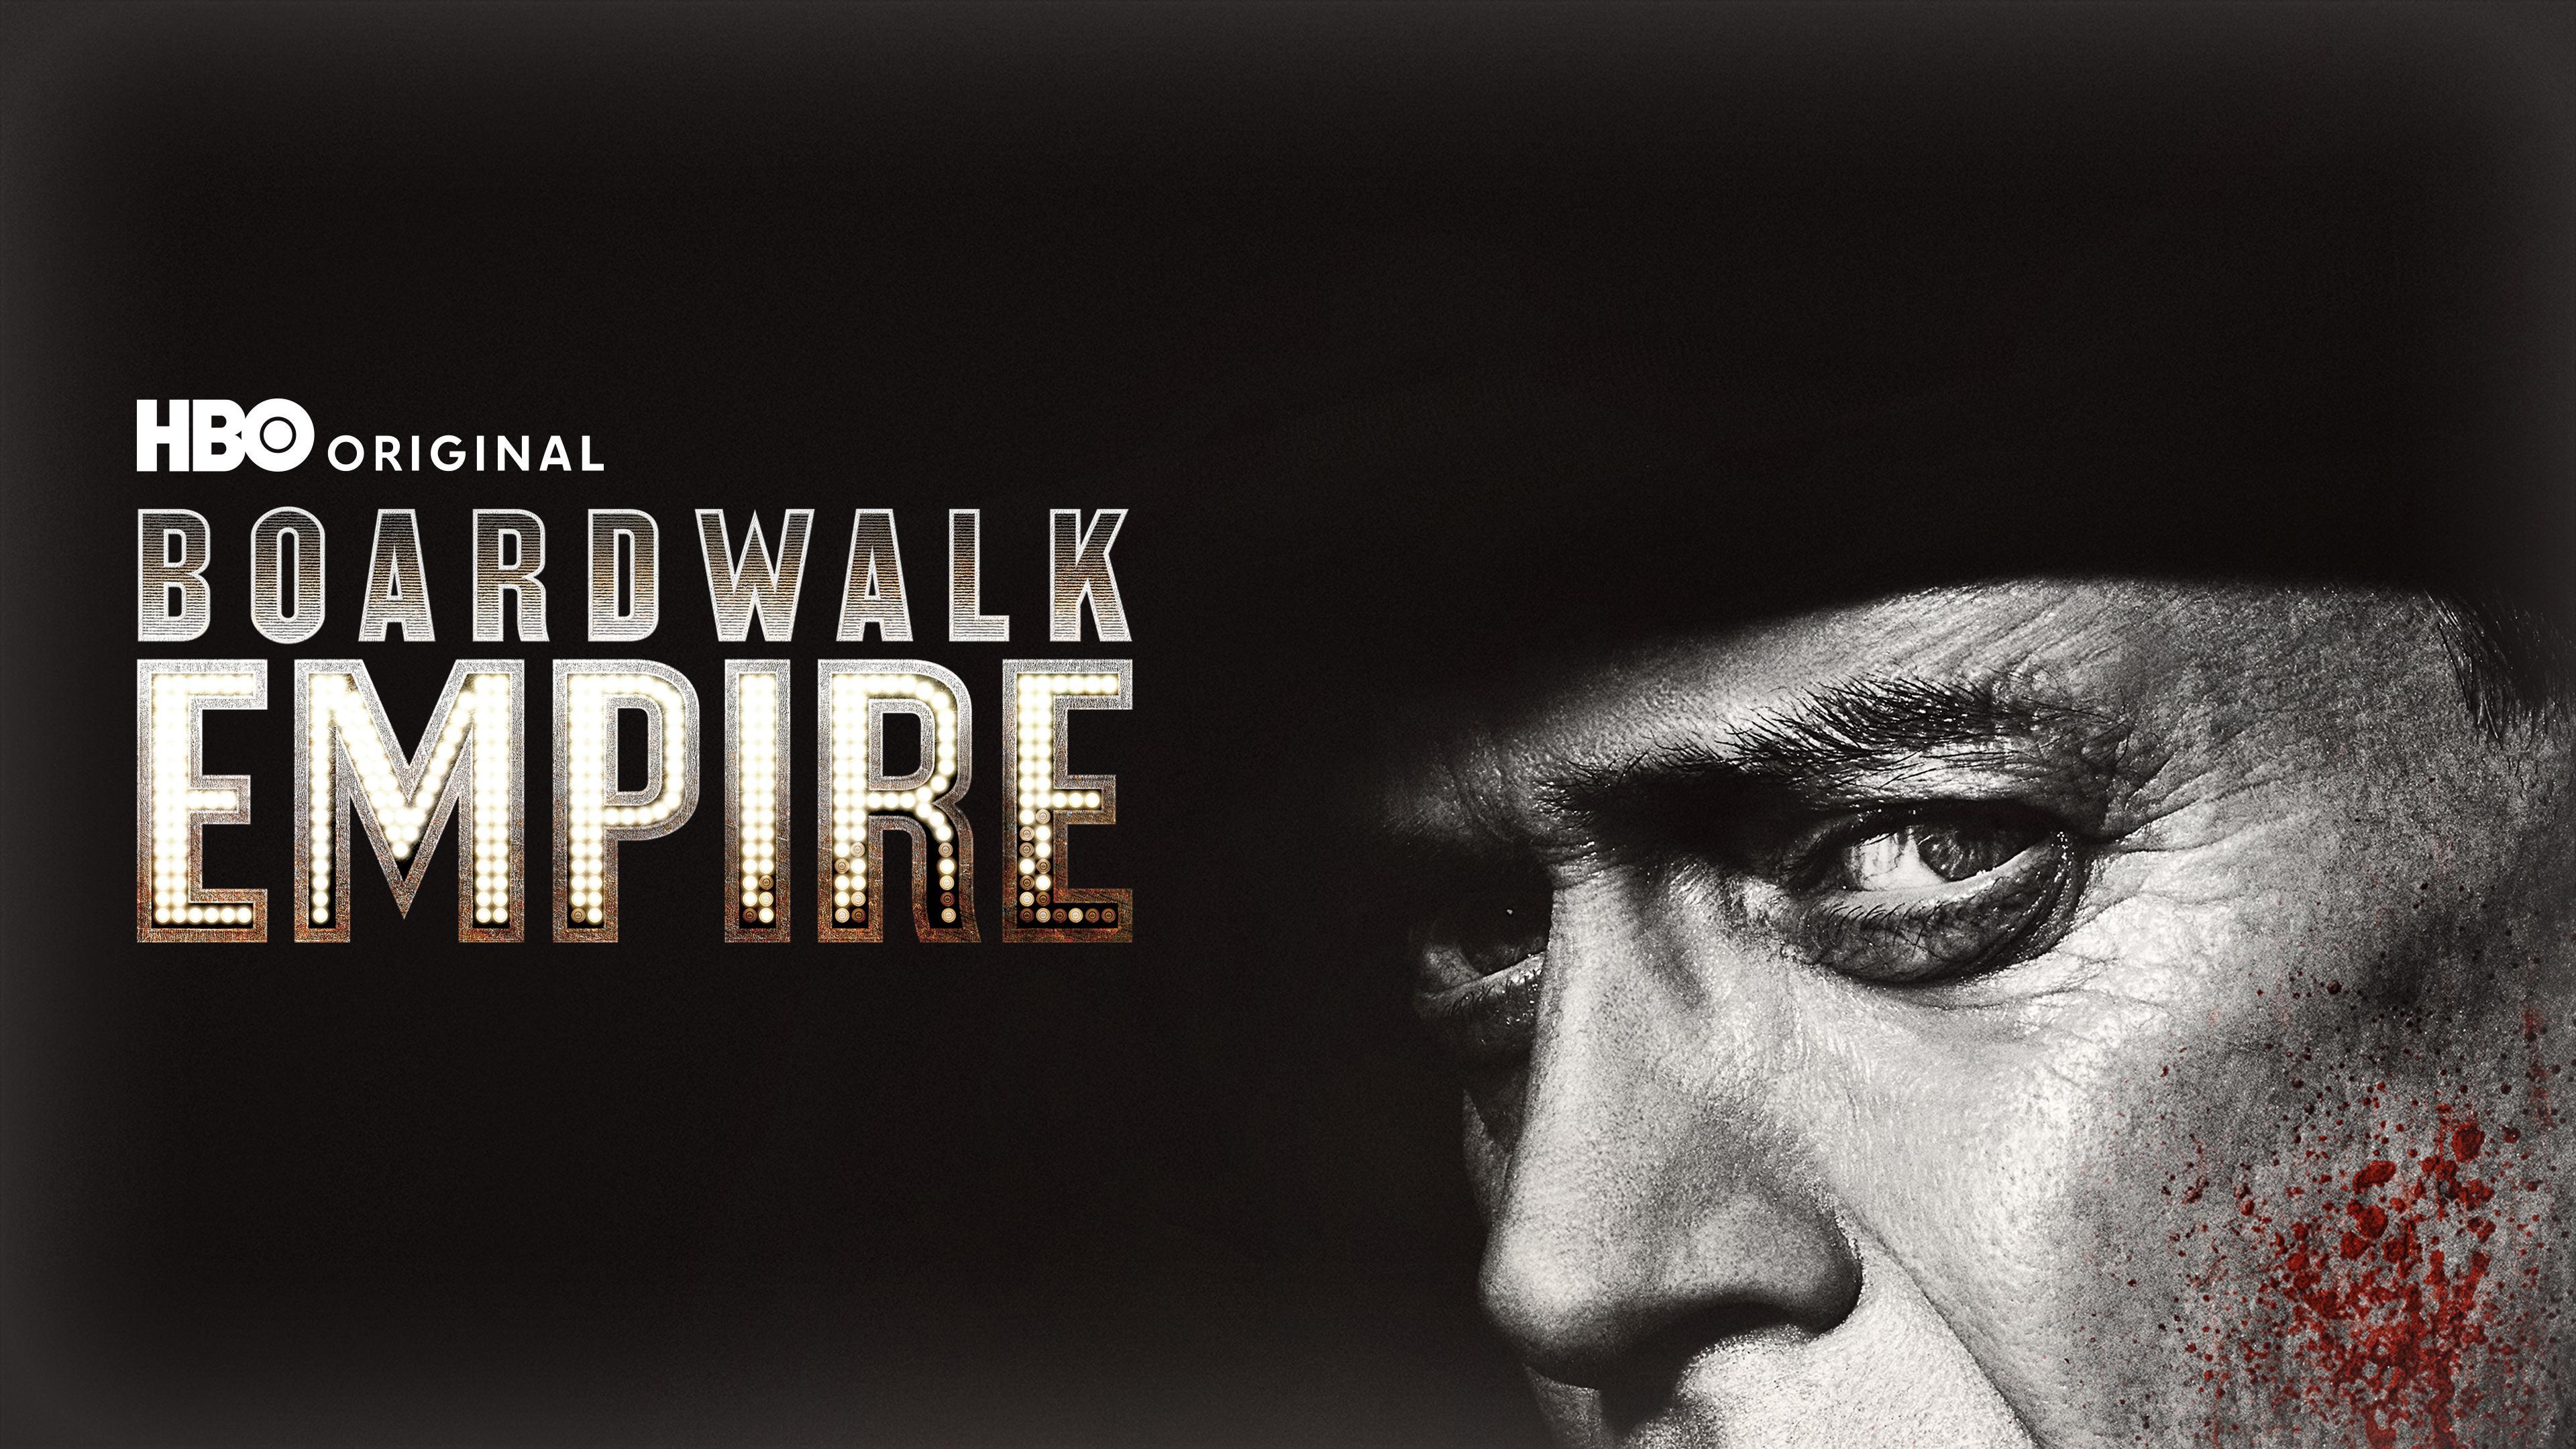 andrew sallie recommends boardwalk empire full episodes free pic